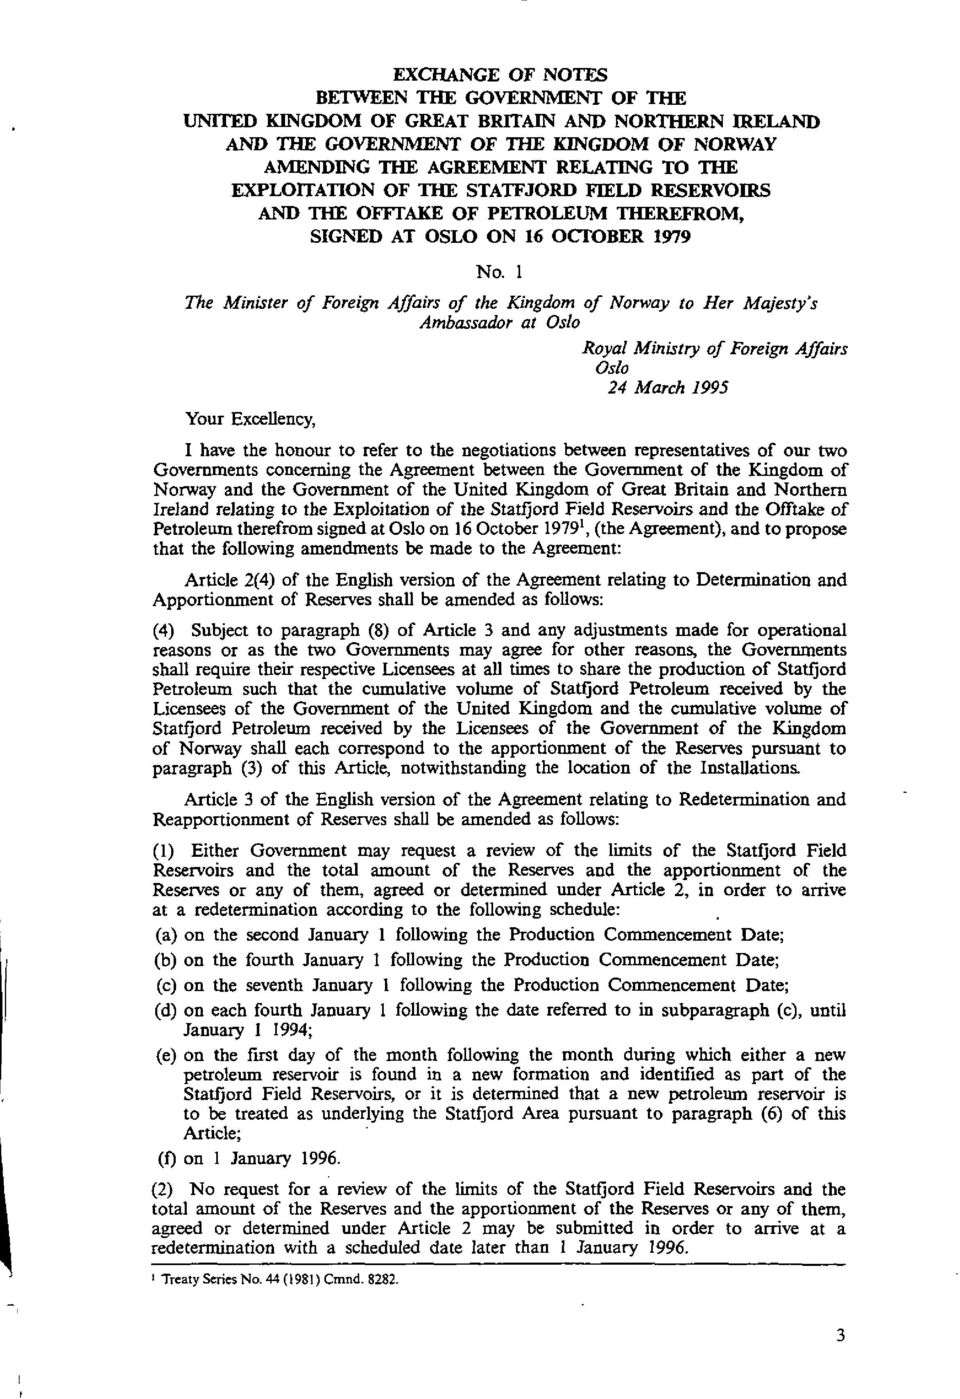 1 The Minister of Foreign Affairs of the Kingdom of Norway to Her Majesty's Ambassador at Oslo Royal Ministry of Foreign Affairs Oslo 24 March 1995 Your Excellency, I have the honour to refer to the